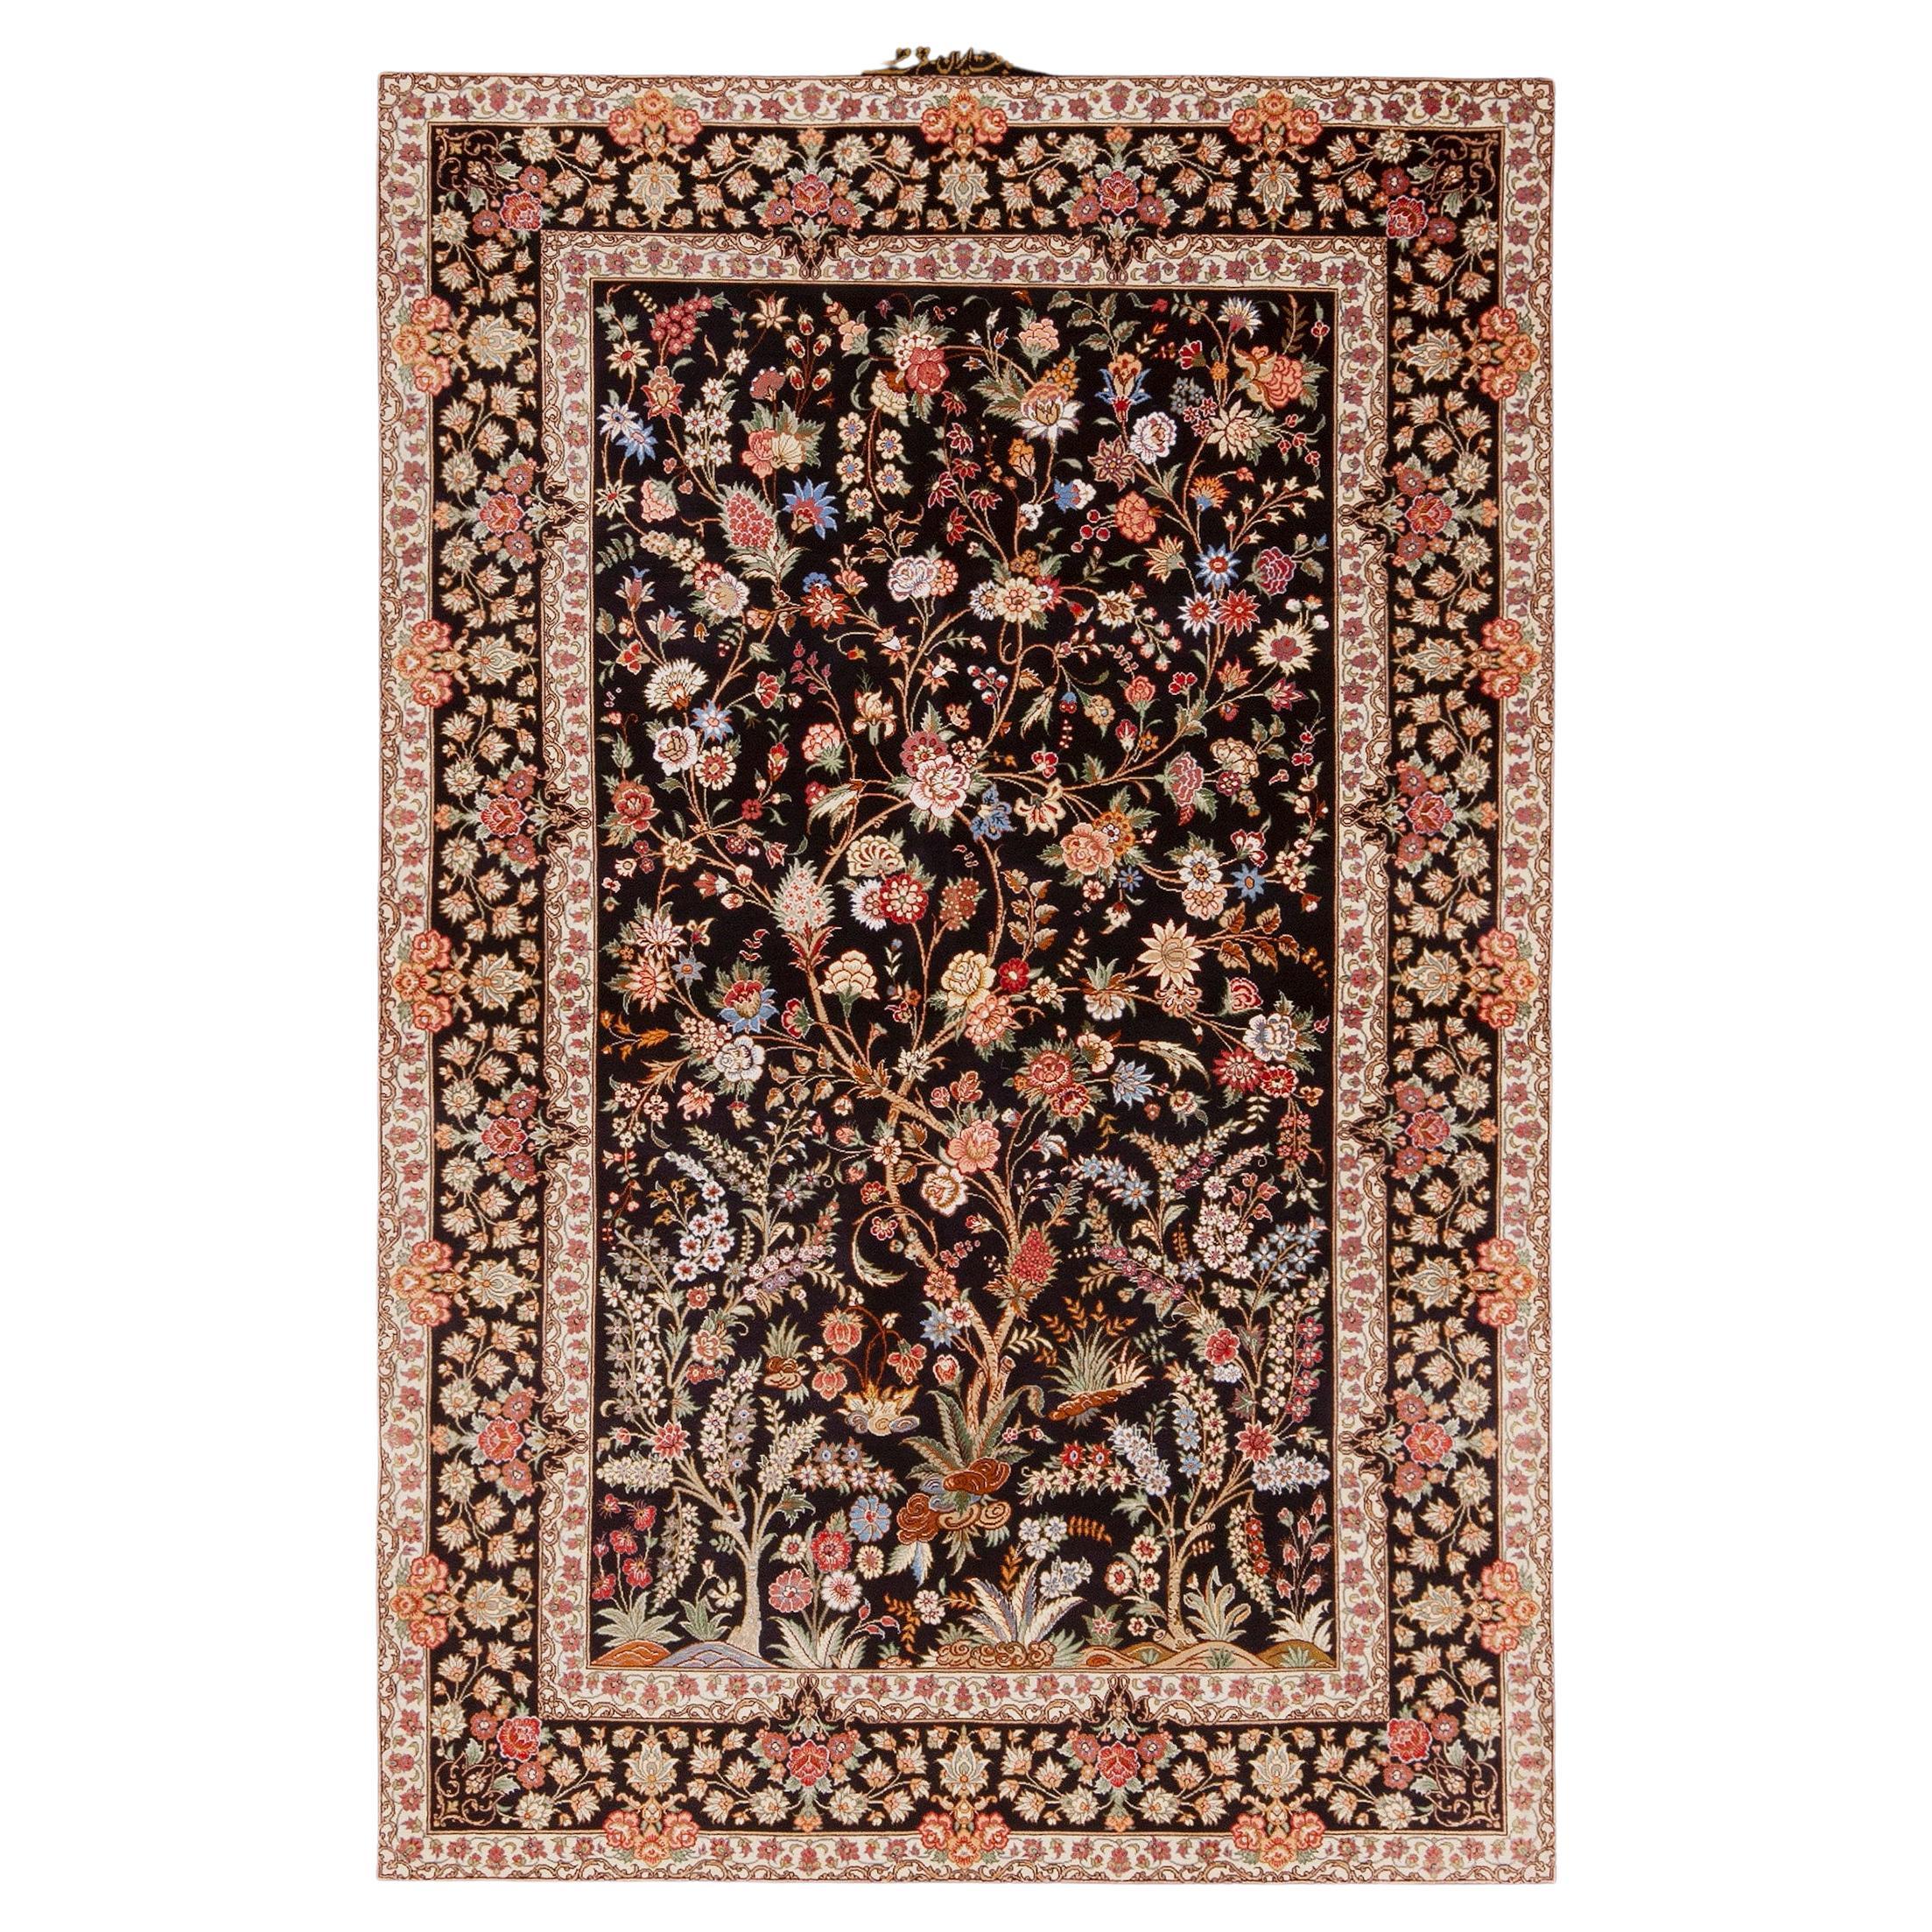 Small Size Floral Design Luxurious Vintage Persian Silk Qum Rug 3'4" x 5' For Sale